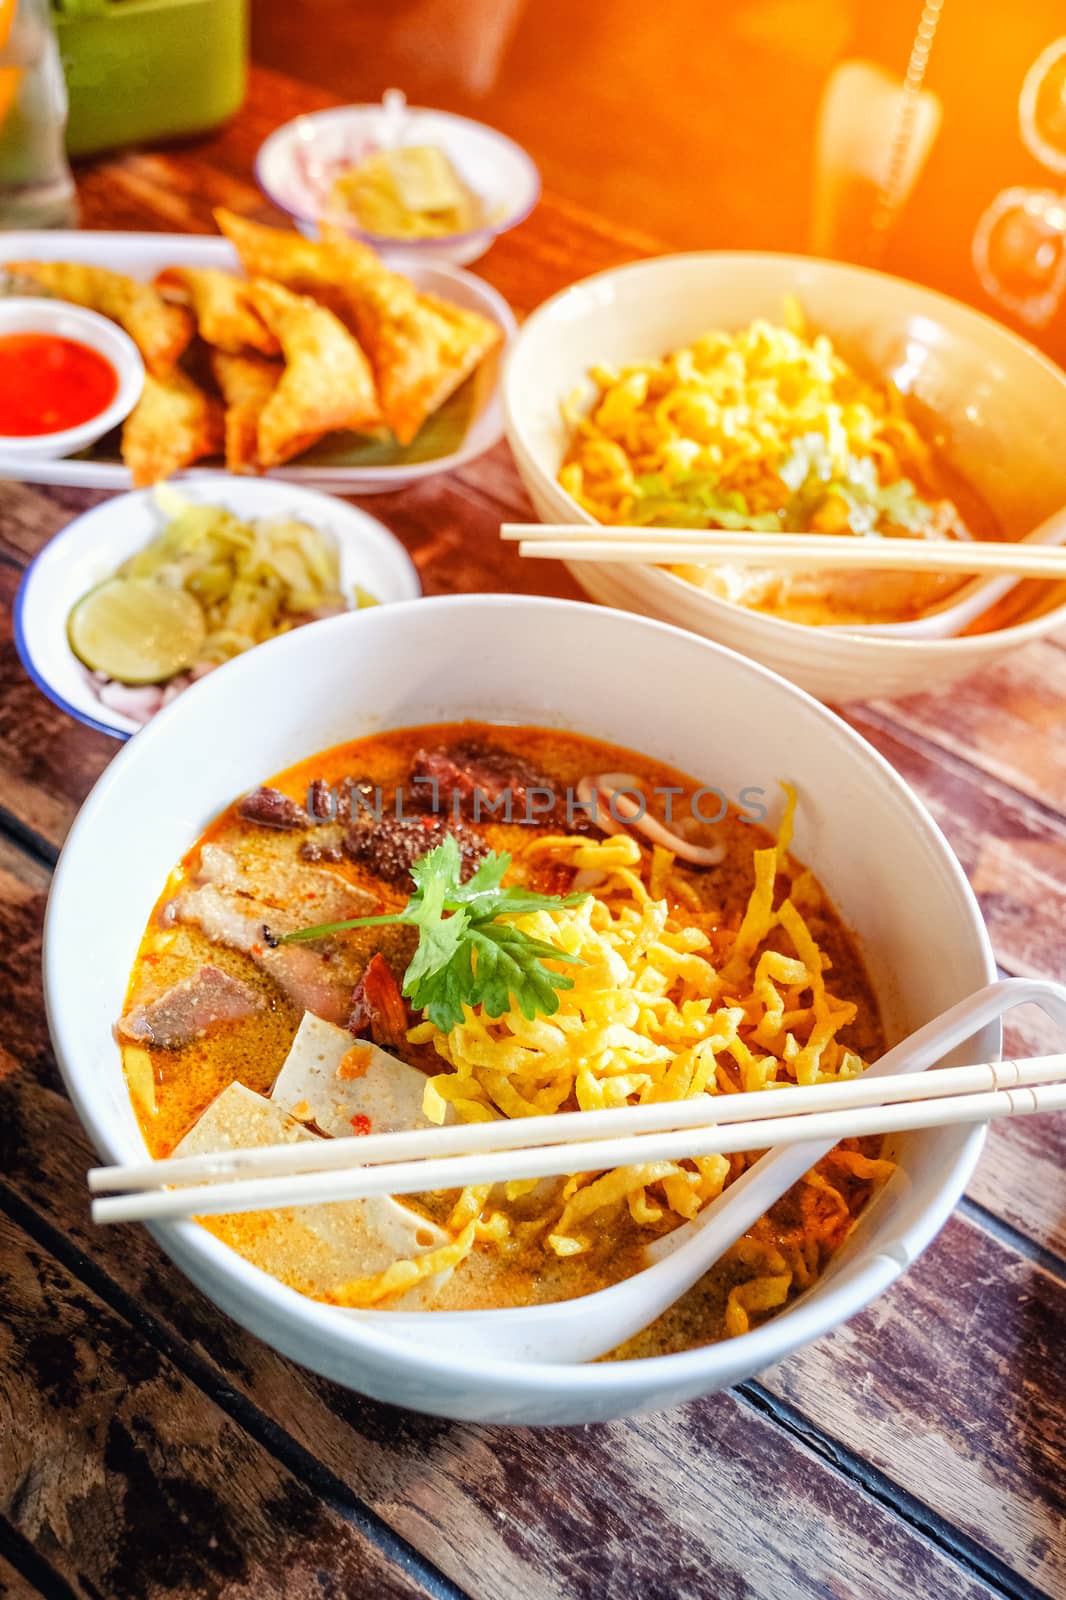 Northern Thai  Curried noodle soup (Khao soi) with chicken meat  by Surasak